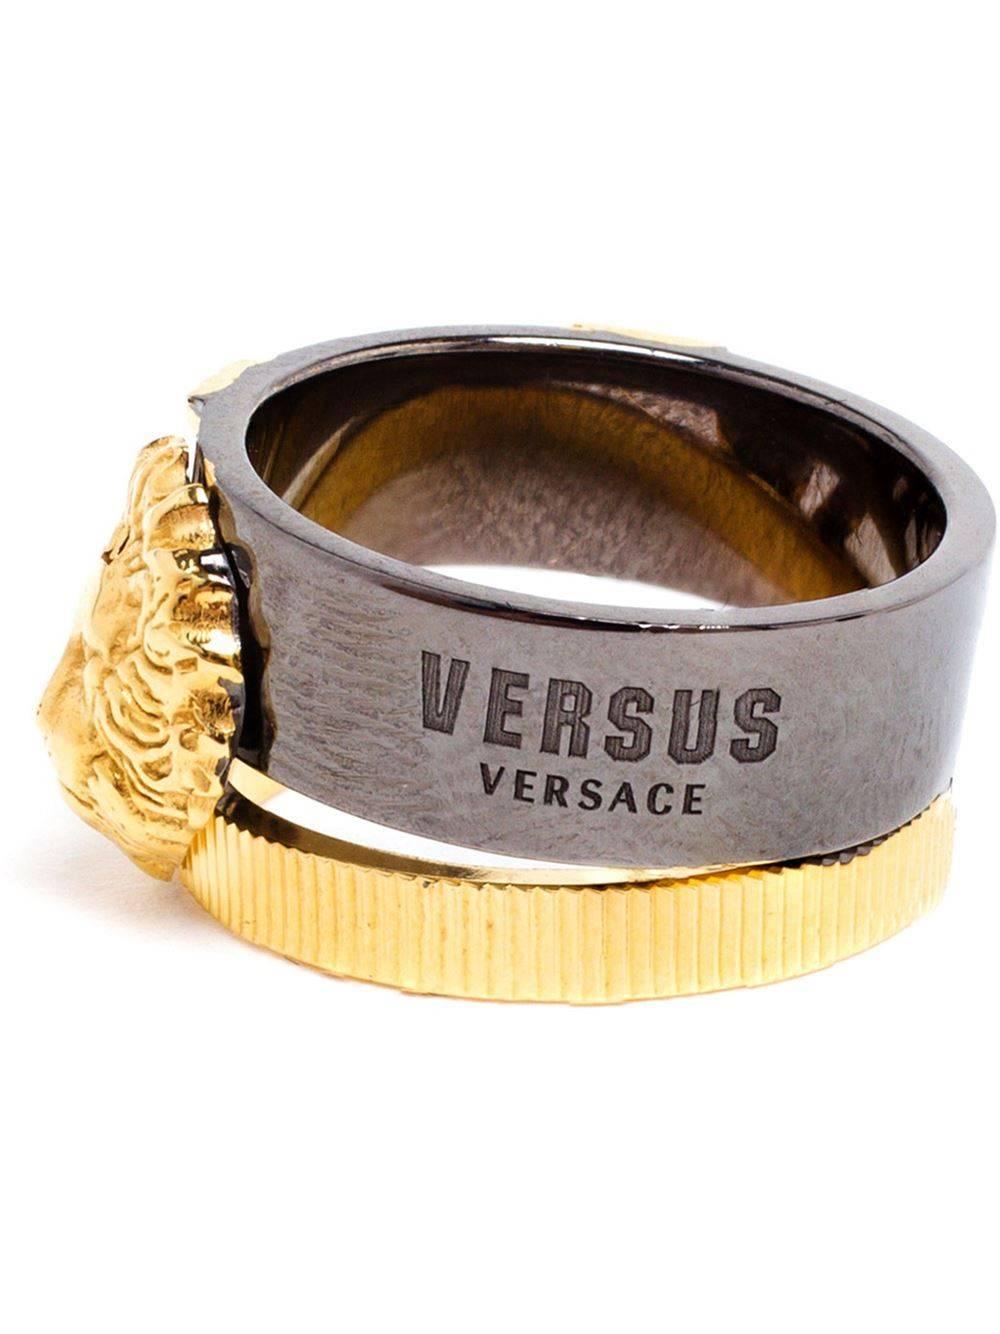 VERSACE

Anthony Vaccarello X Versus Versace lion ring for Women
 
A definitely cool accessory.

To wear at any time of the day or night, it is perfect for making every look unique and incomparable.

Made in Italy


Approx. US Size 6


New, with